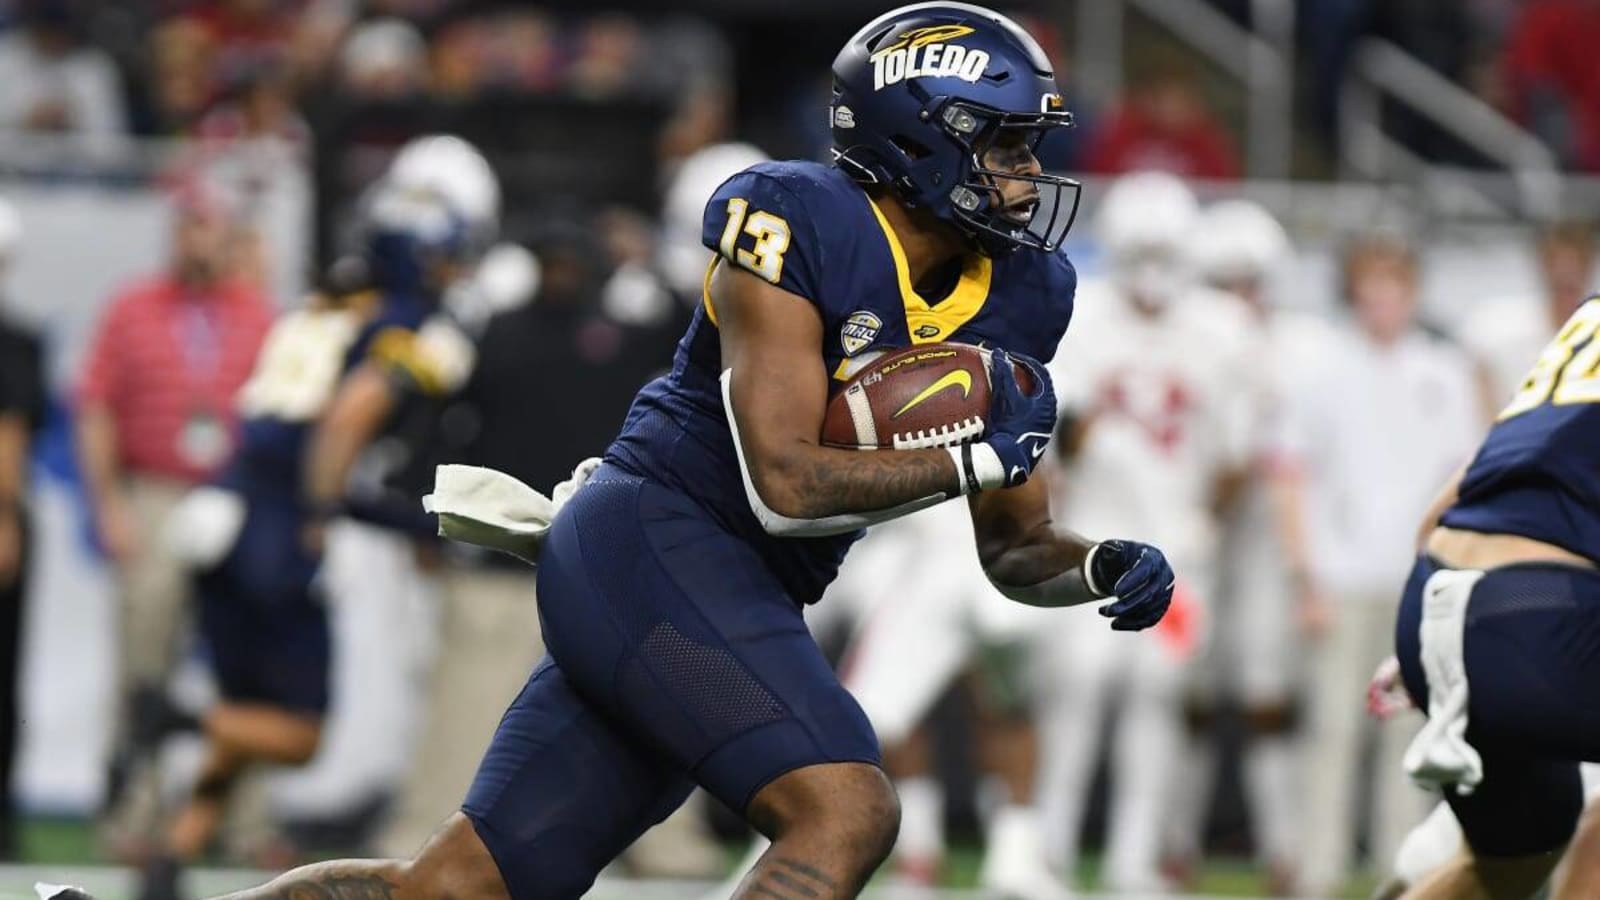 Former Toledo Running Back Puts Florida State in Final Three Transfer Options